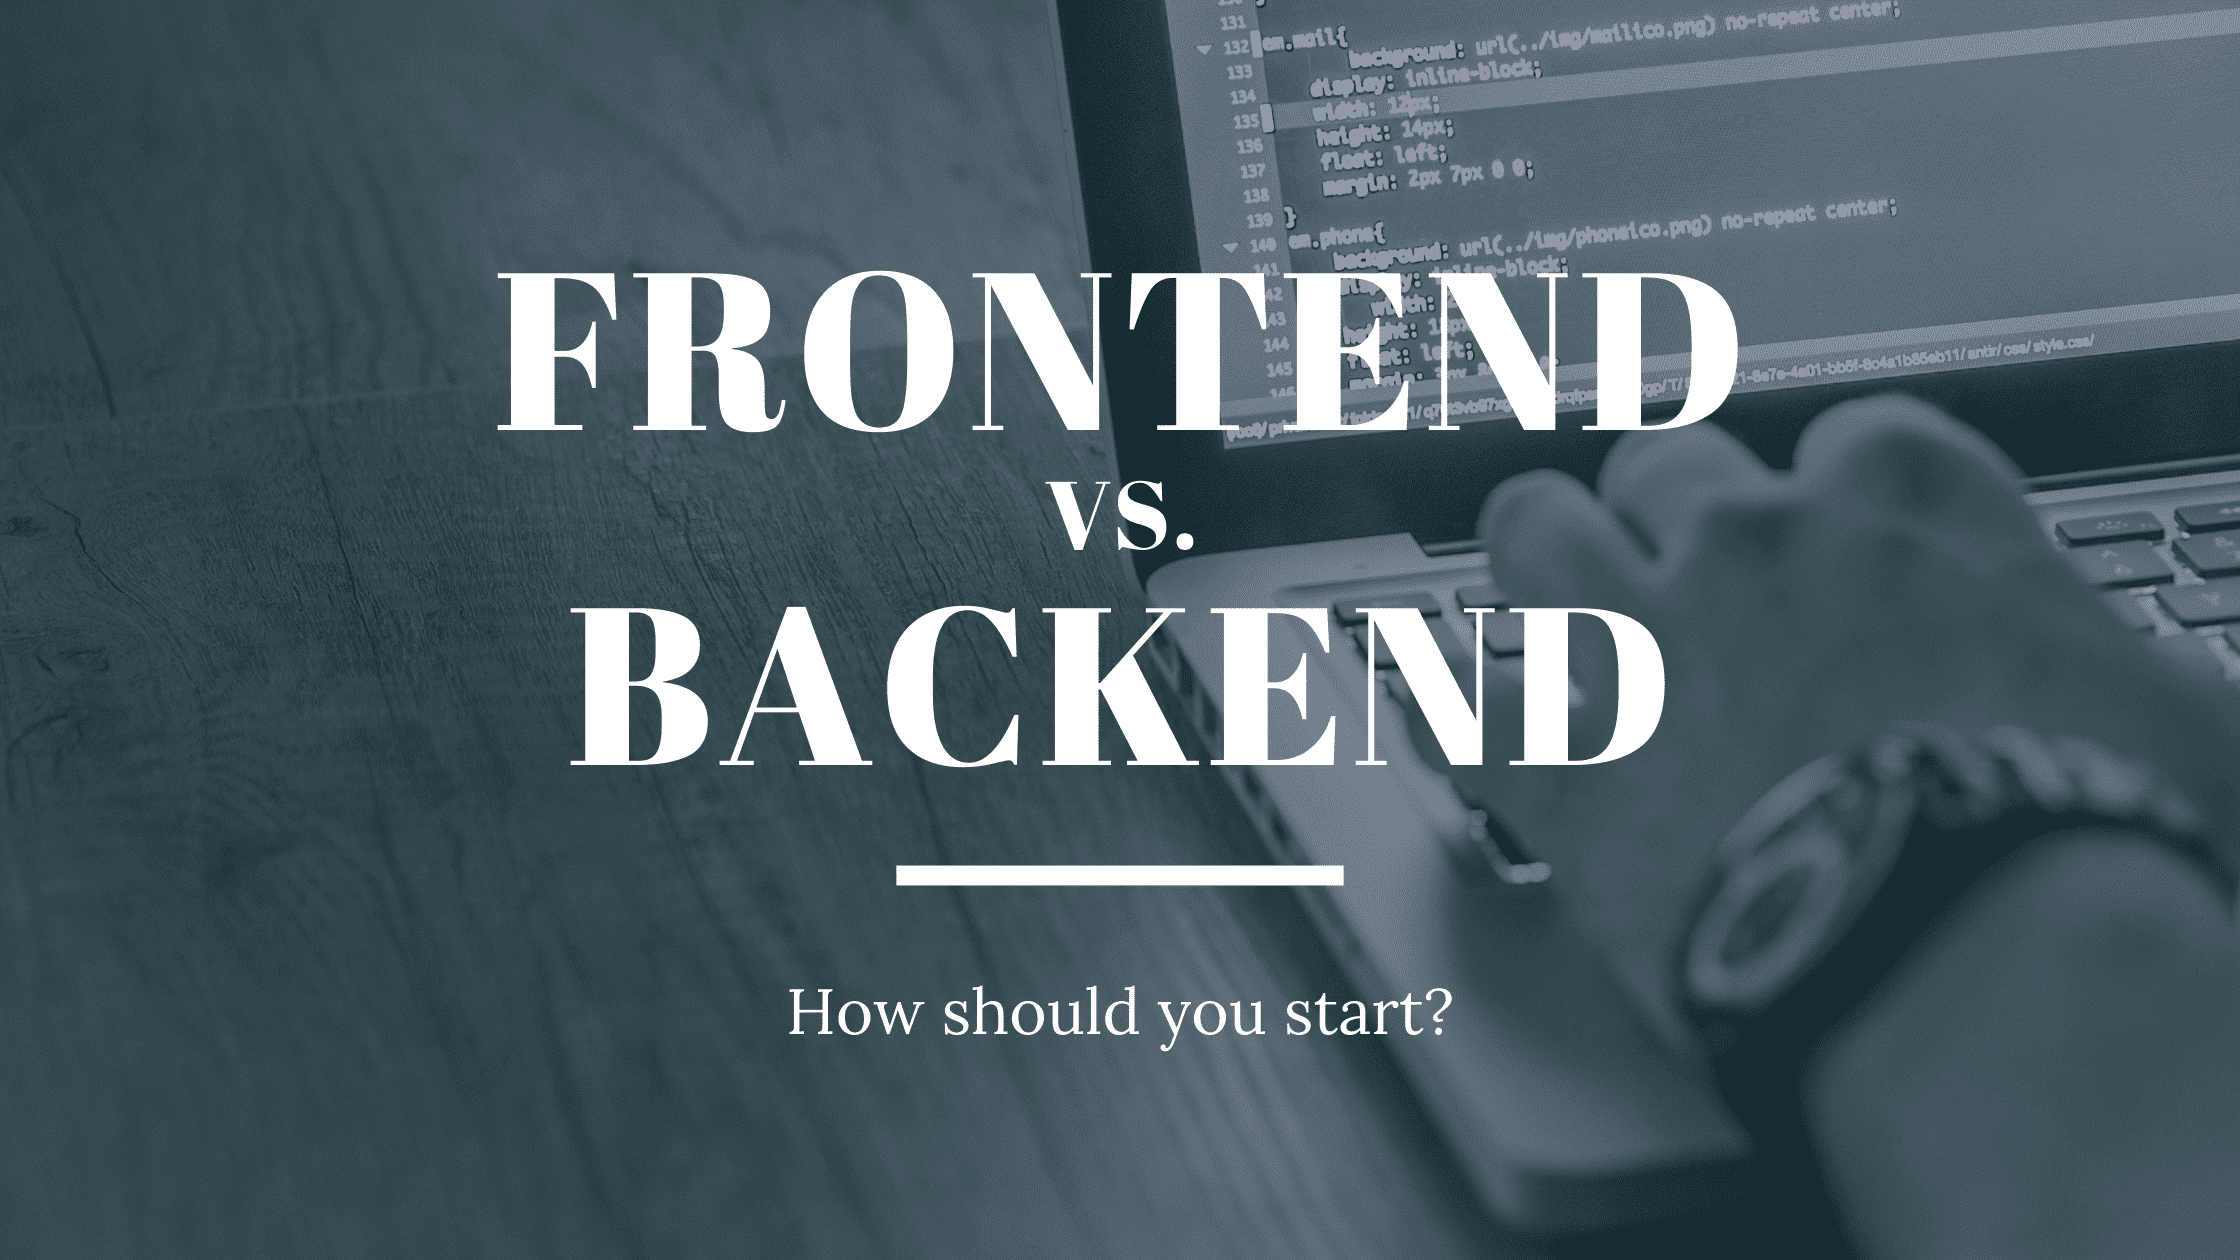 Frontend vs Backend, how should you start? – White letters on a background picture of a programmer.